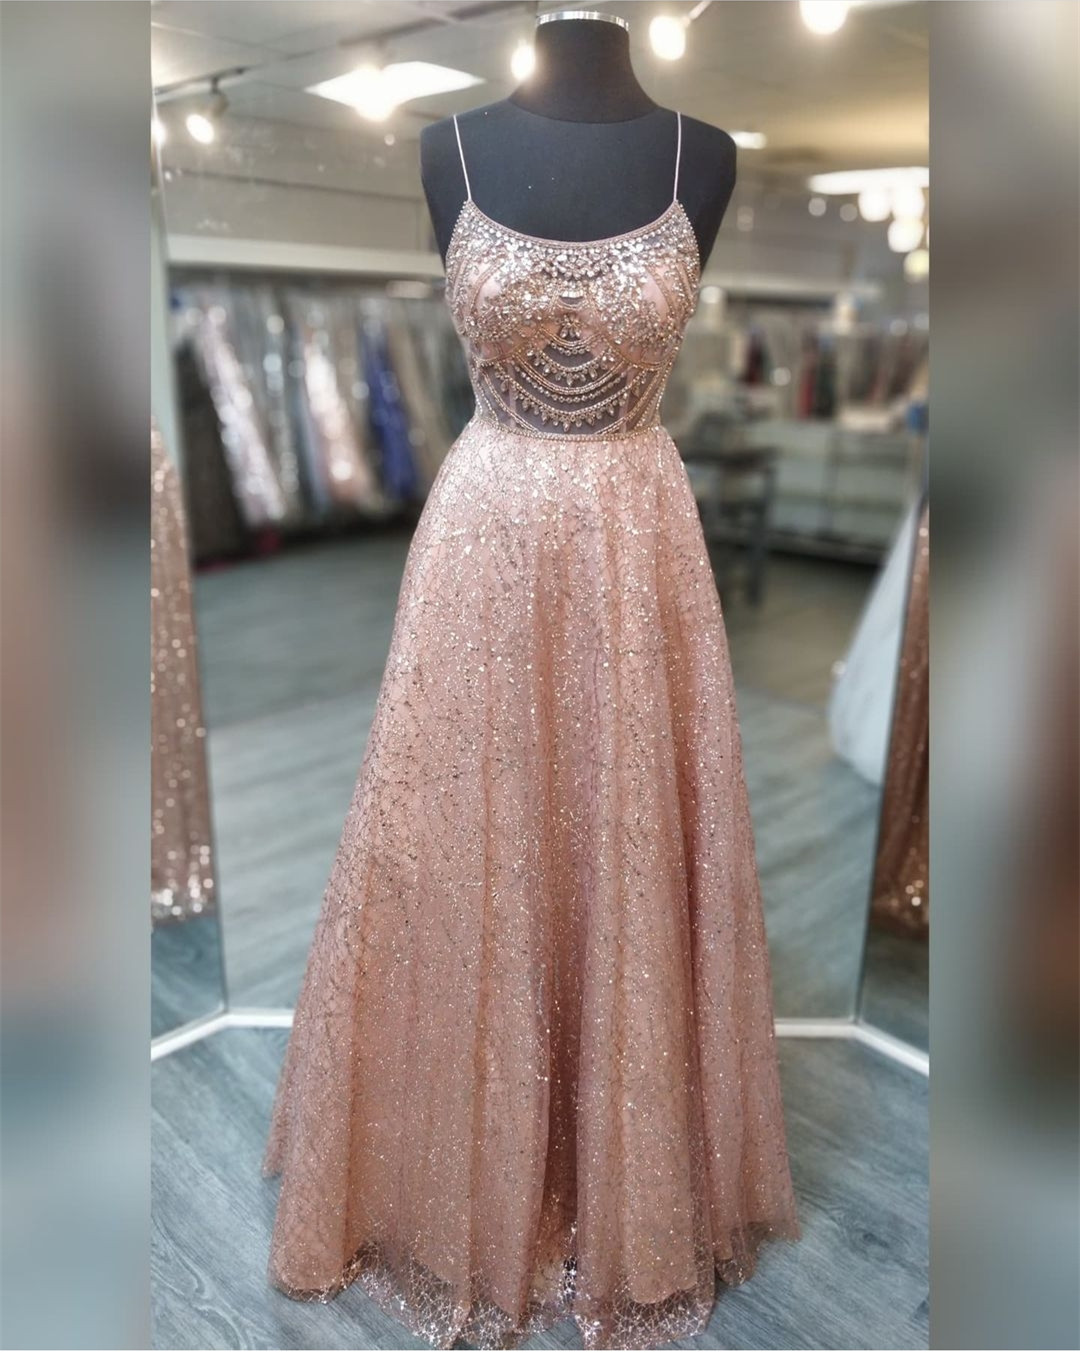 Scoop Neck Rose Gold Glitter Prom Dresses Evening Gowns With Sheer Bodice